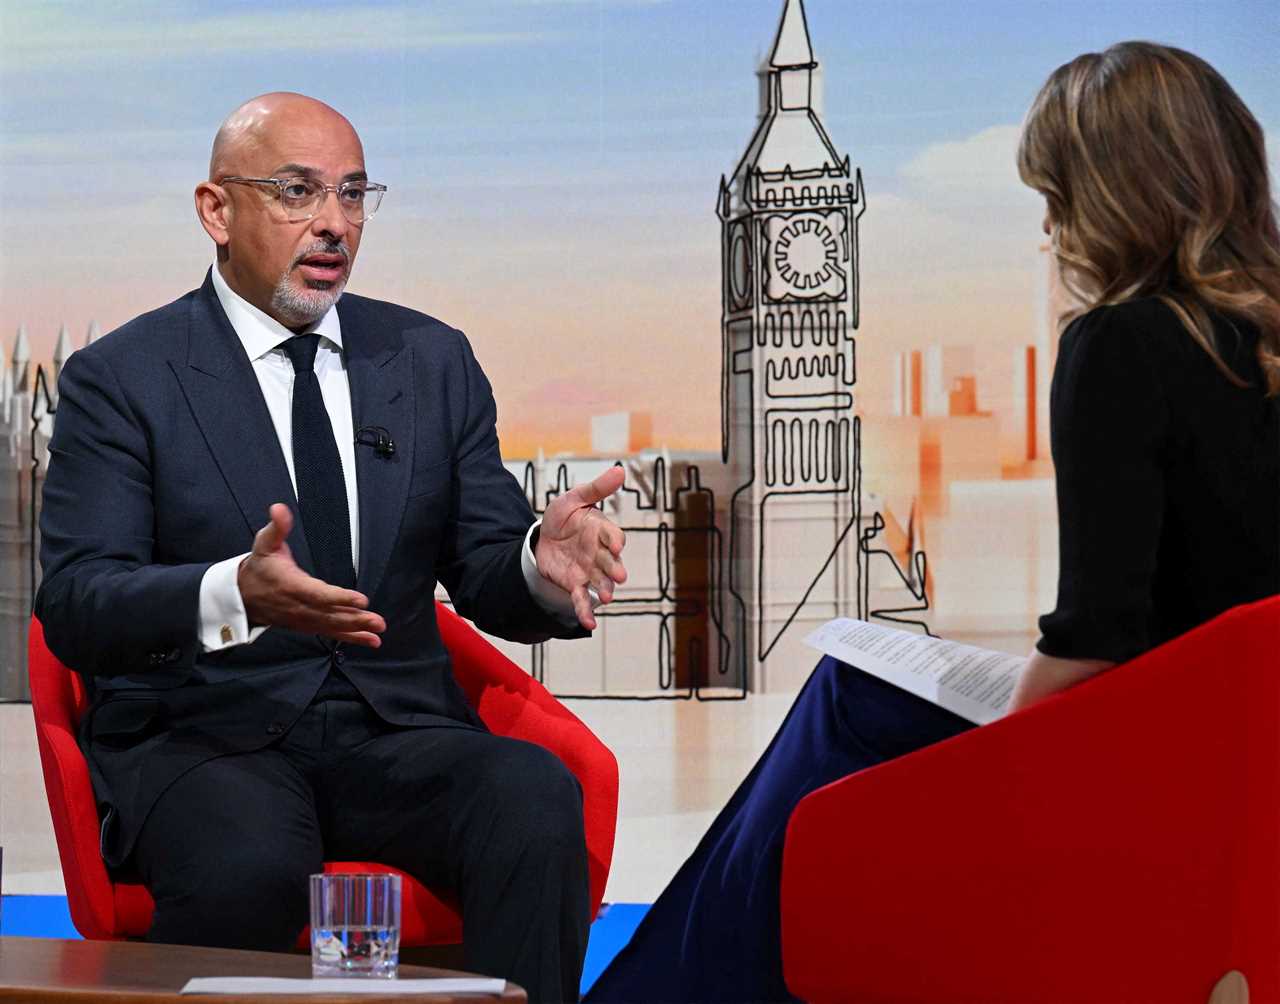 Nadhim Zahawi promises to take action if police probe MP sex attack claims